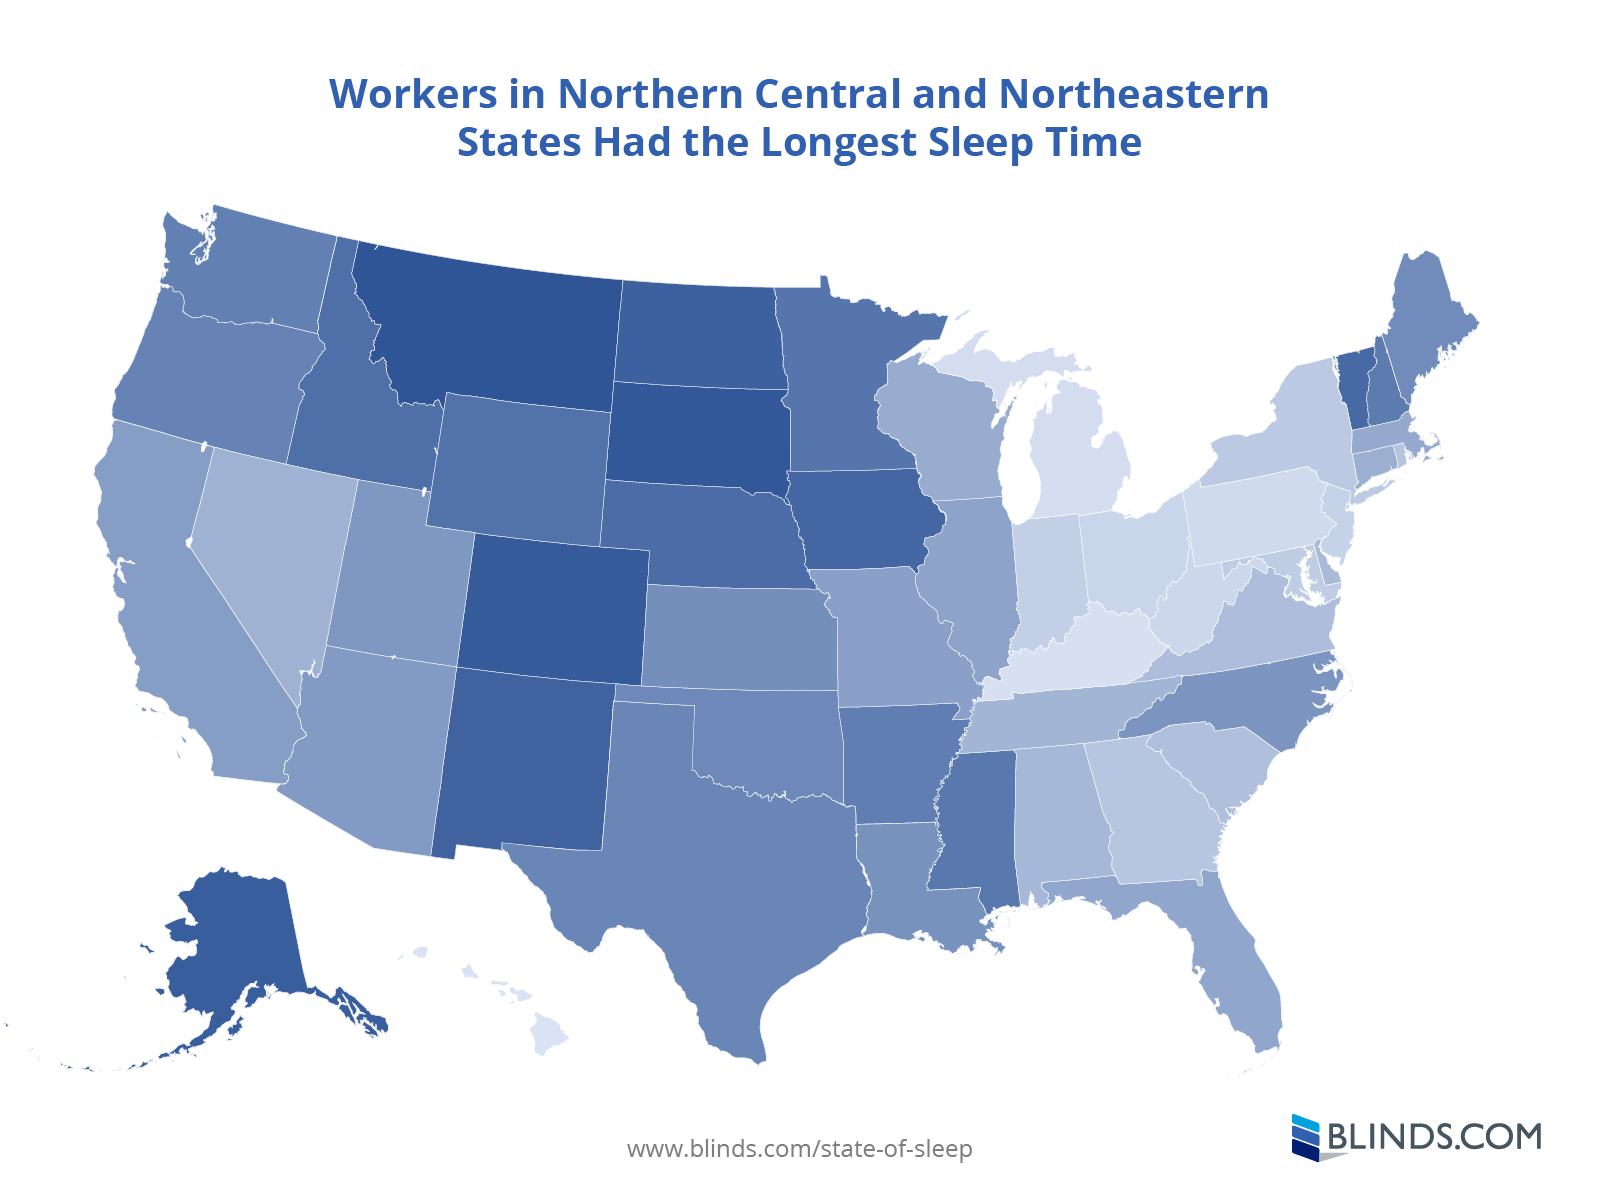 Workers in Northern Central and Northeastern States Had the Longest Sleep Time